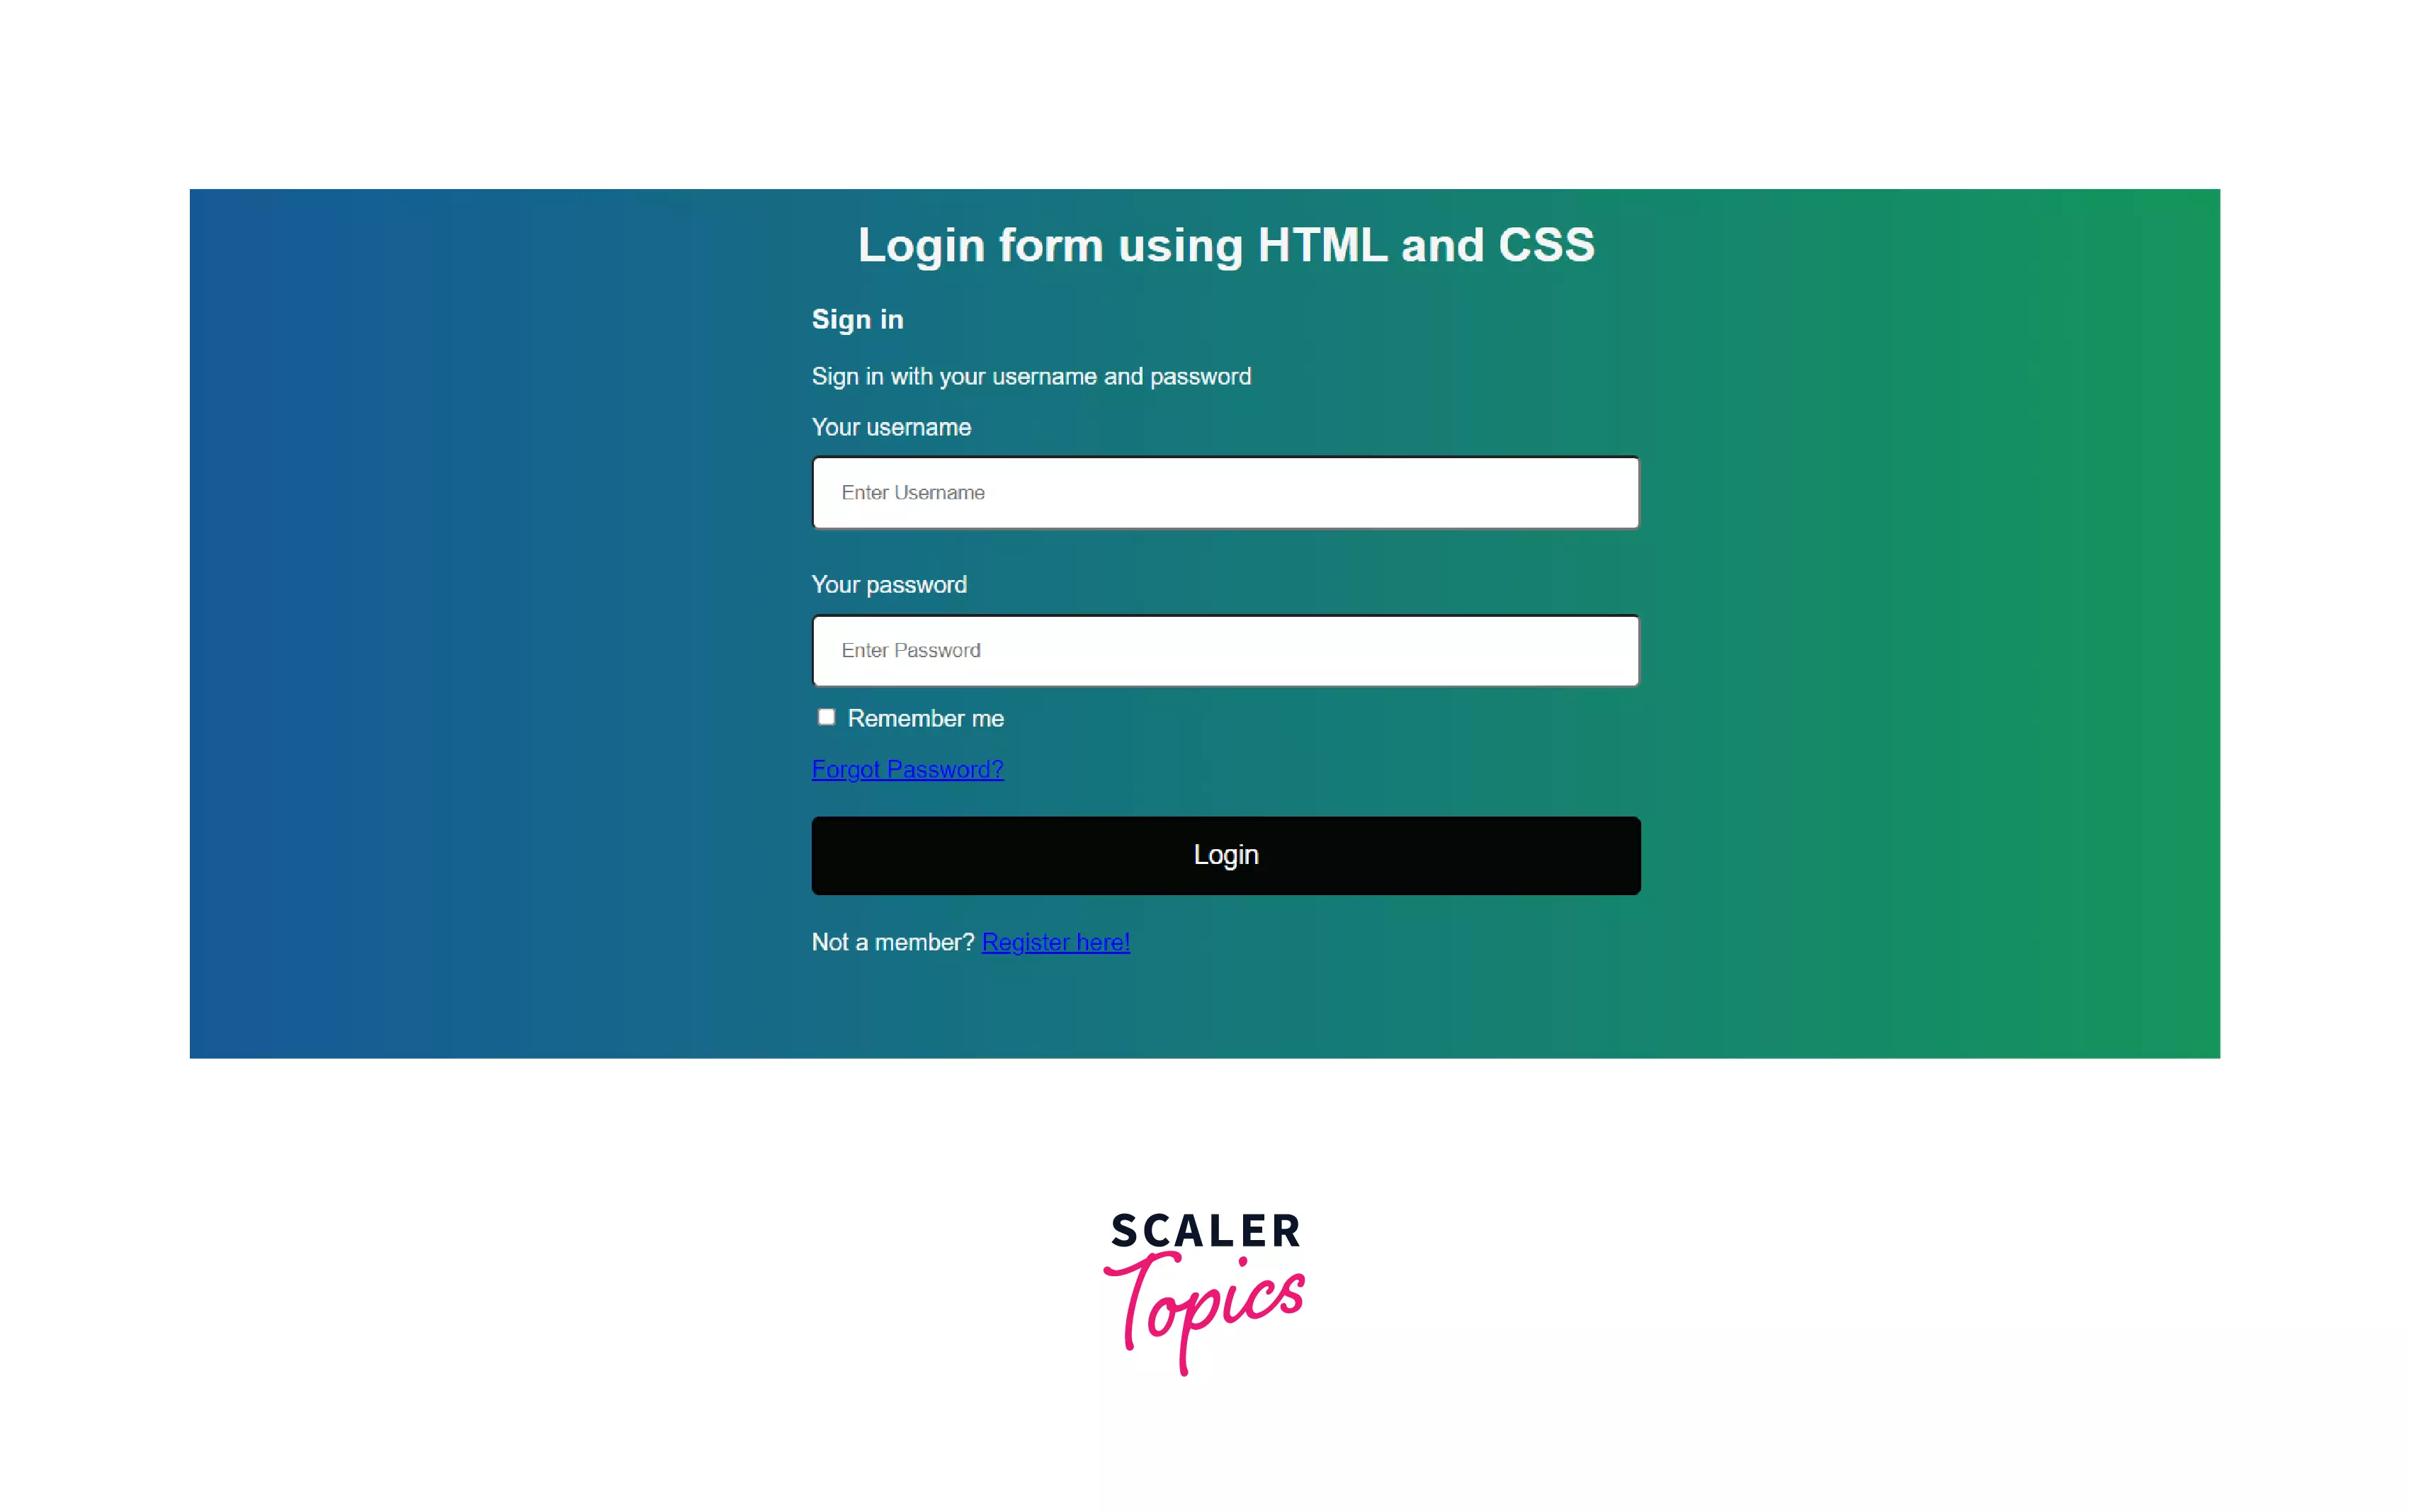 Styling the login page with CSS with a good translucent look